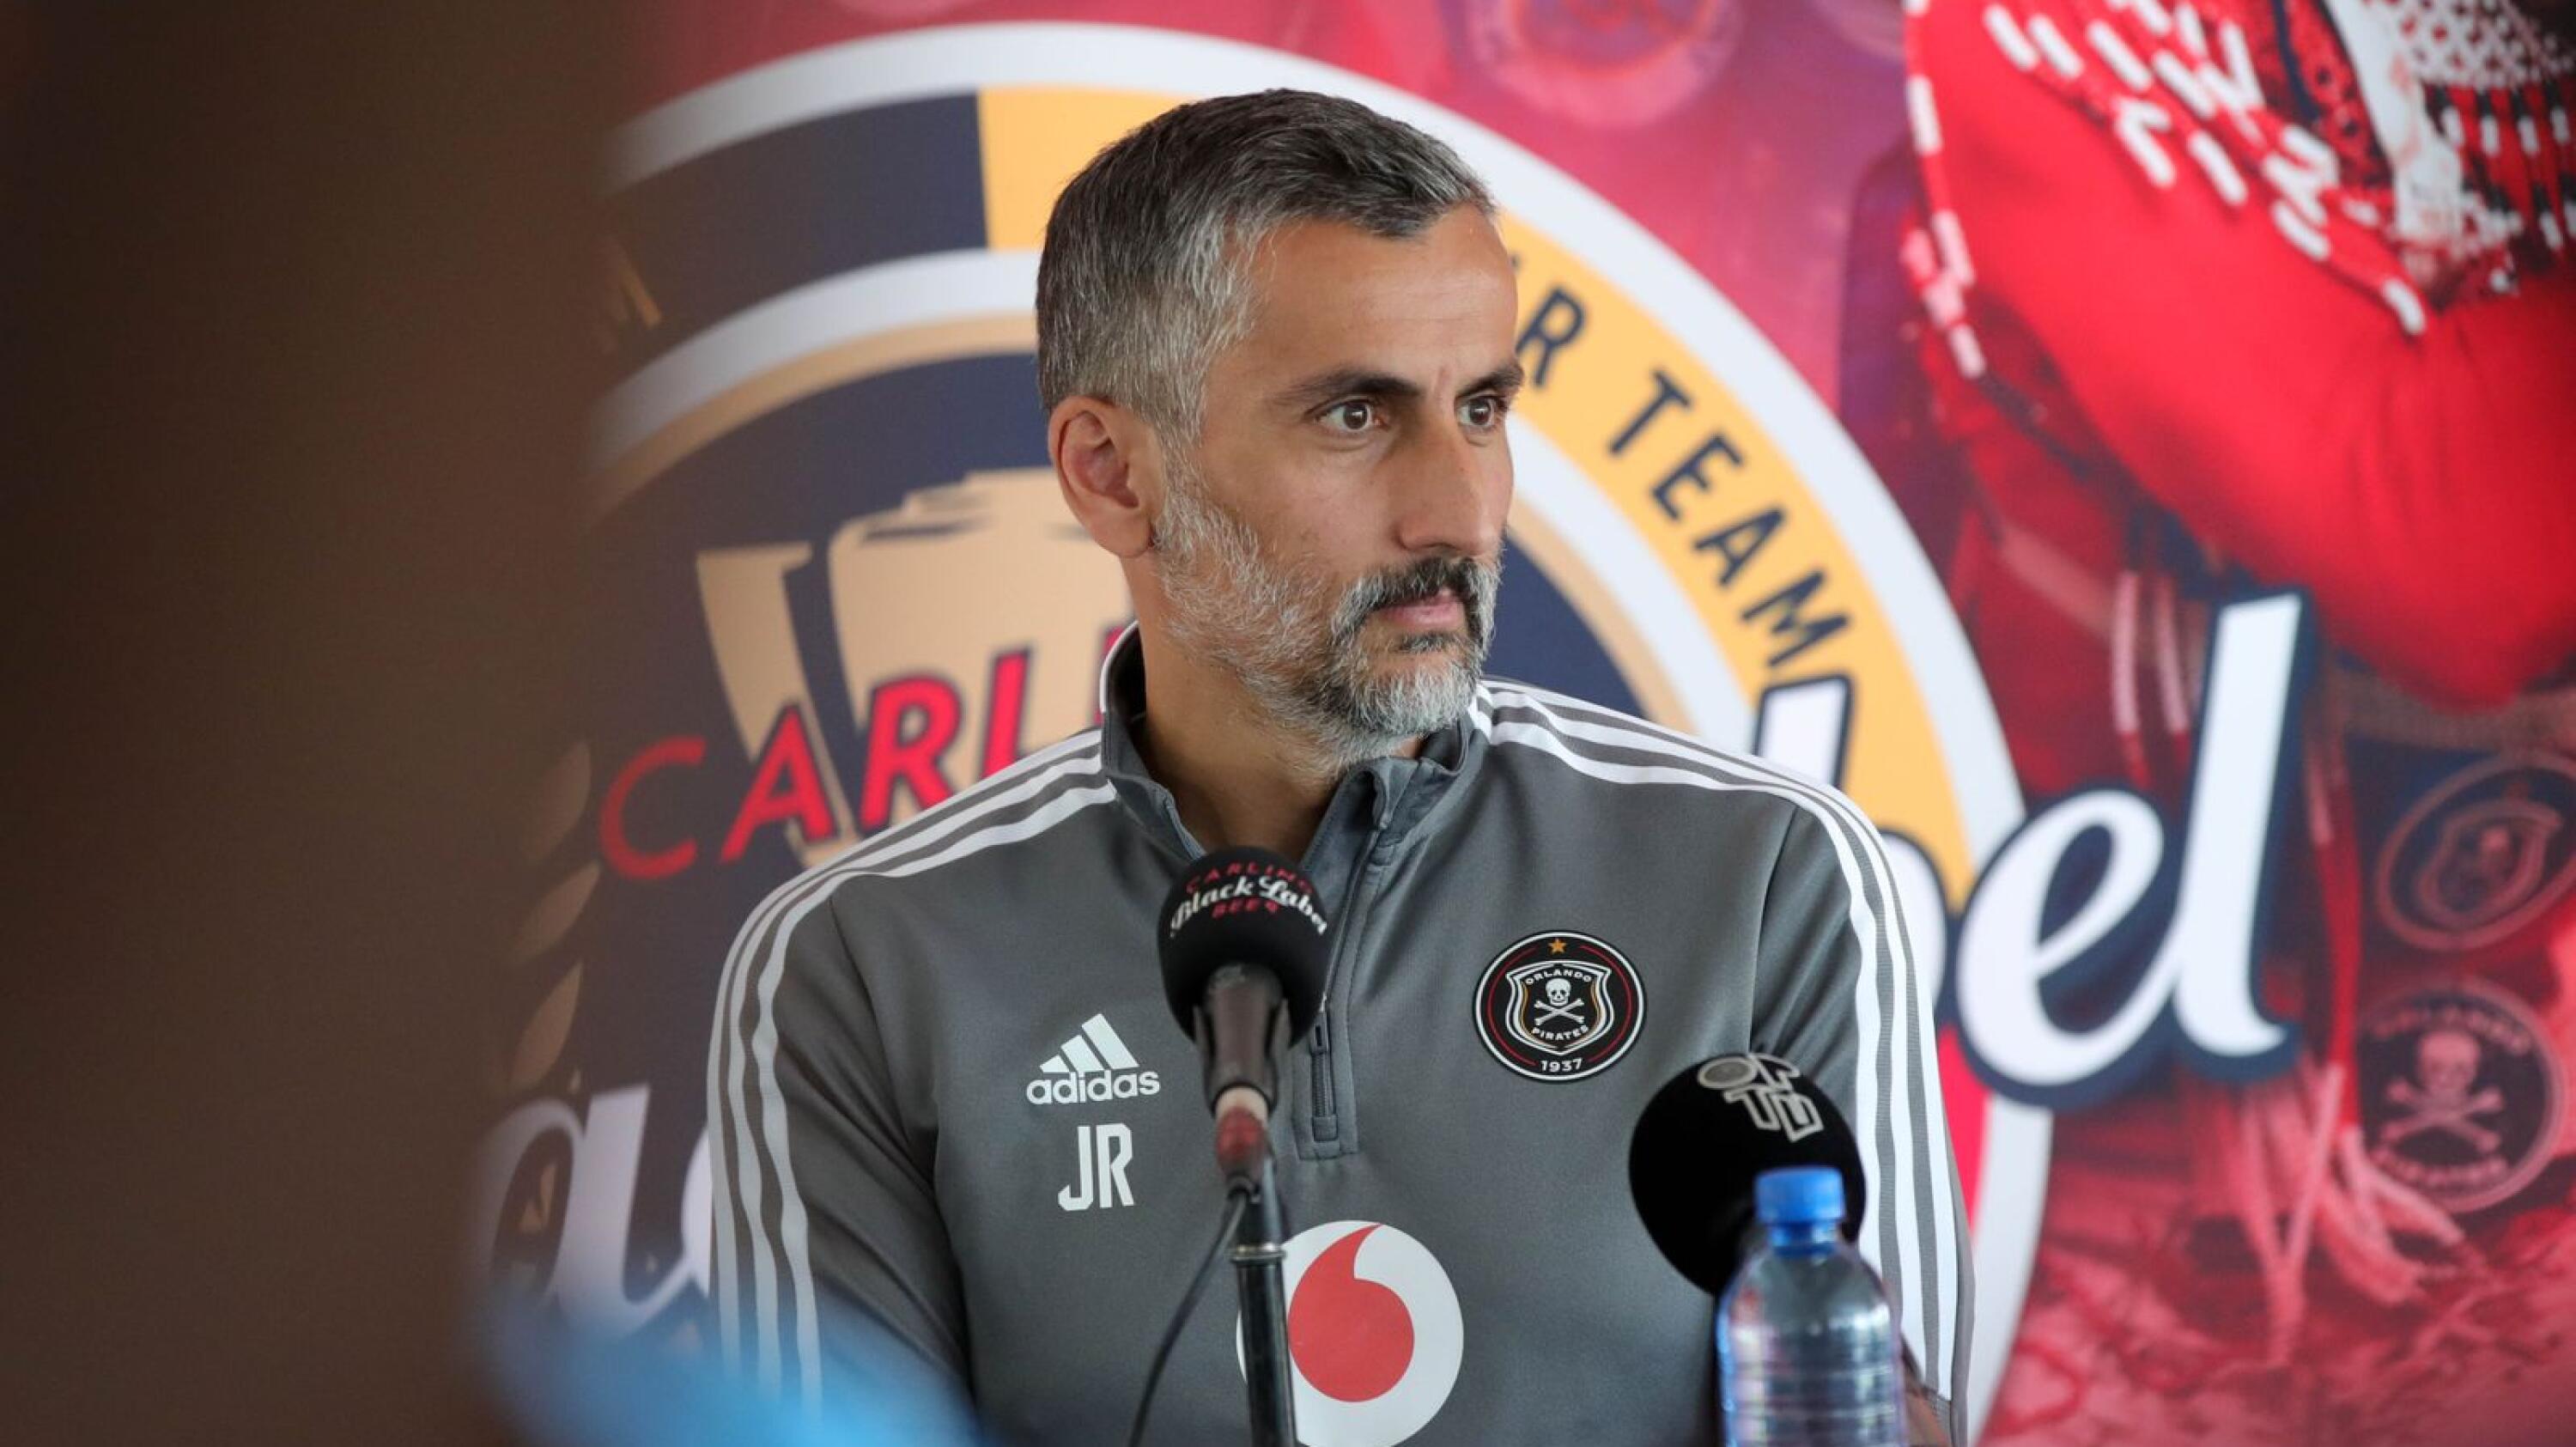 Orlando Pirates head coach Jose Riveiro will not be in the dugout for this weekend’s Soweto derby against Kaizer Chiefs after being red-carded two weeks ago